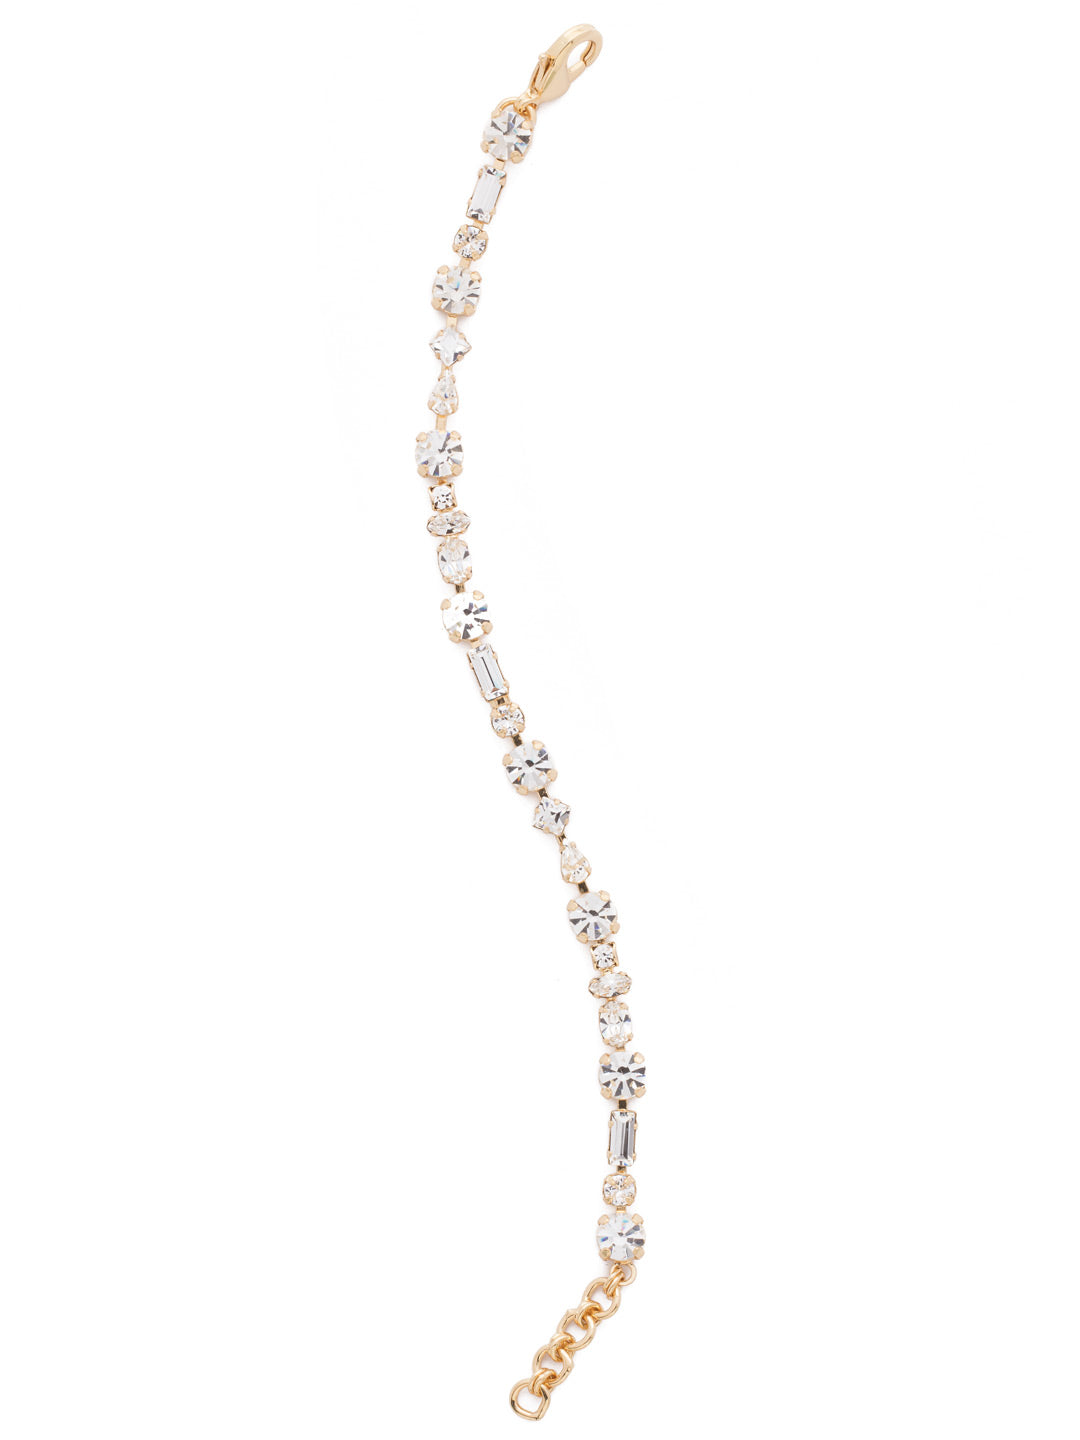 Geometric Crystal Line Tennis Bracelet - BDB7BGCRY - <p>Our classic line bracelet with a geometric twist! This rendition features alternating round, teardrop, and baguette cut crystals. From Sorrelli's Crystal collection in our Bright Gold-tone finish.</p>